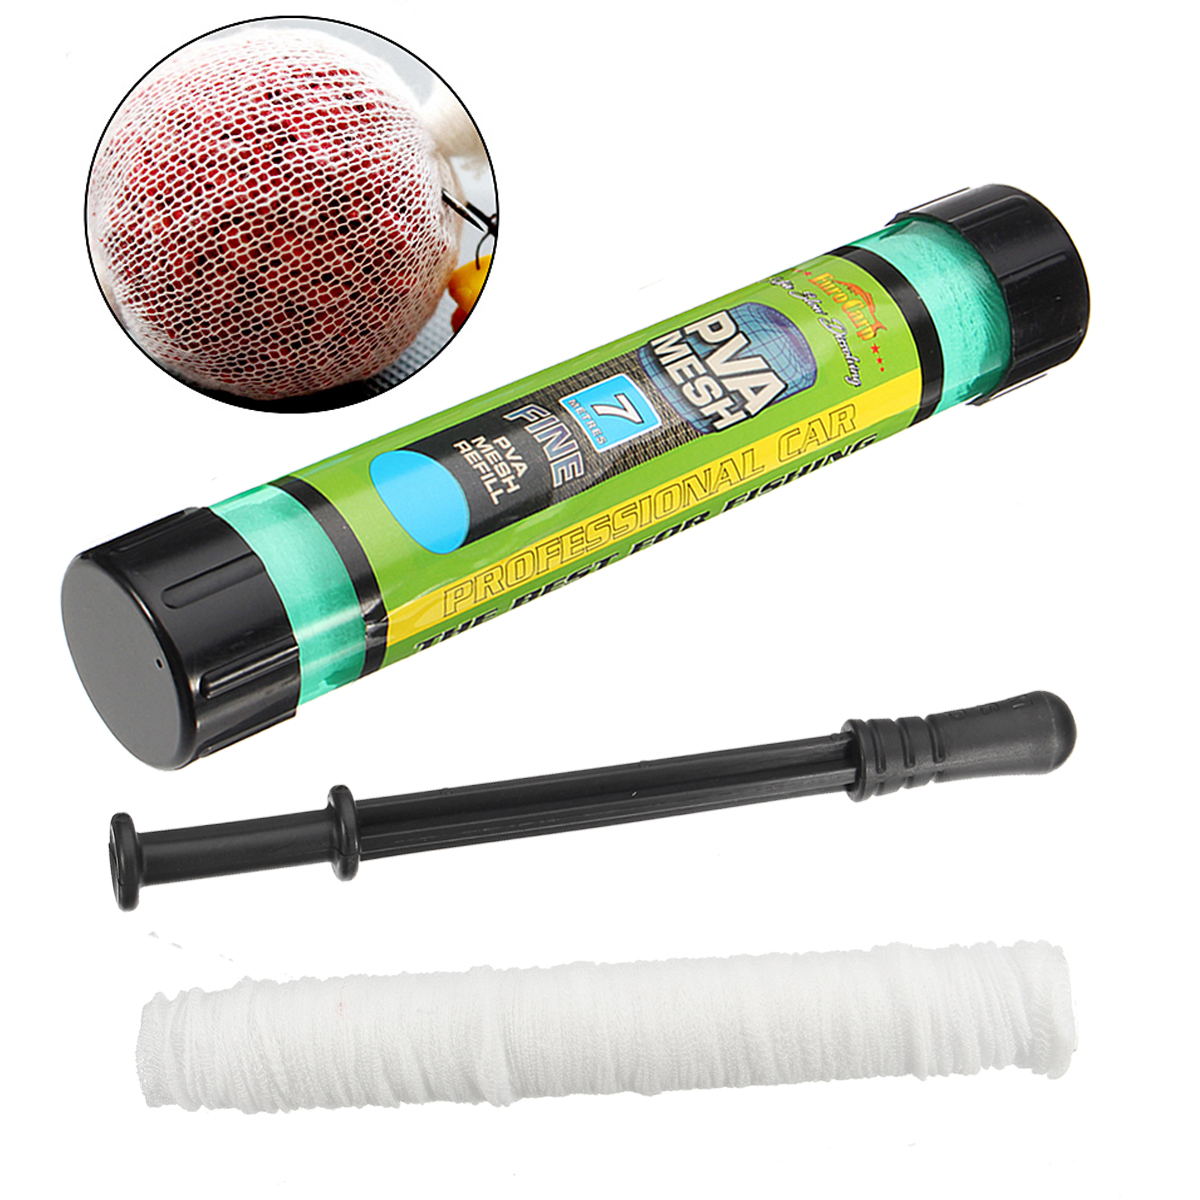 152537mm-Width-PVA-Wide-Wire-Mesh-Coarse-Fishing-Baits-Bag-Stocking-Plunger-Stick-Tube-7m-Length-1298089-7